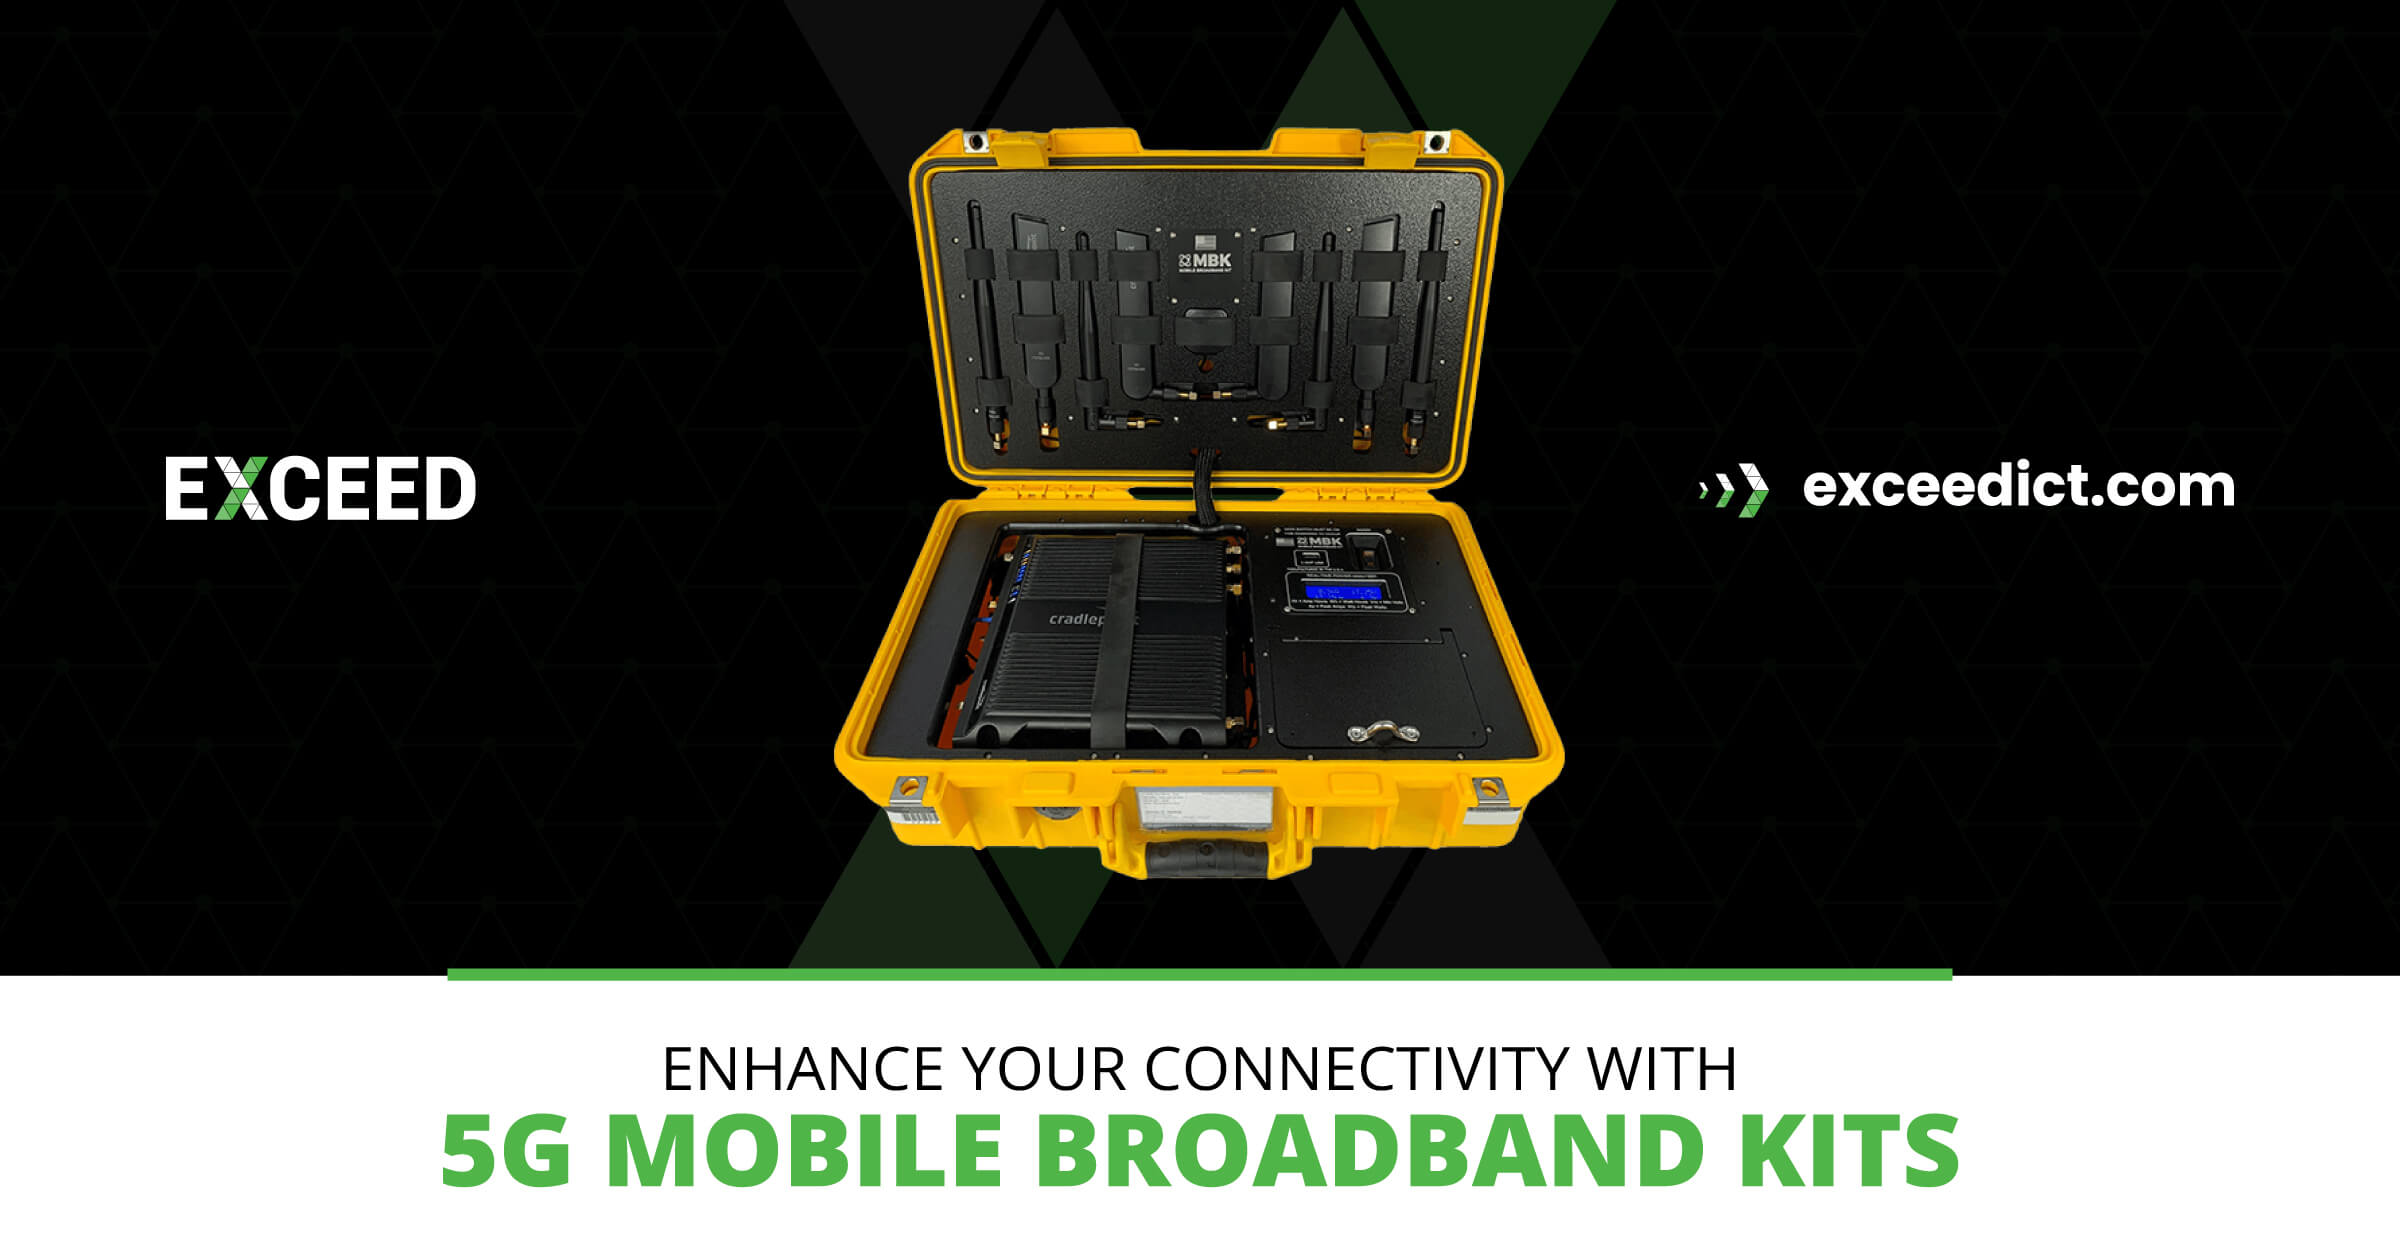 5G Mobile Broadband Kits to Supercharge Your Internet